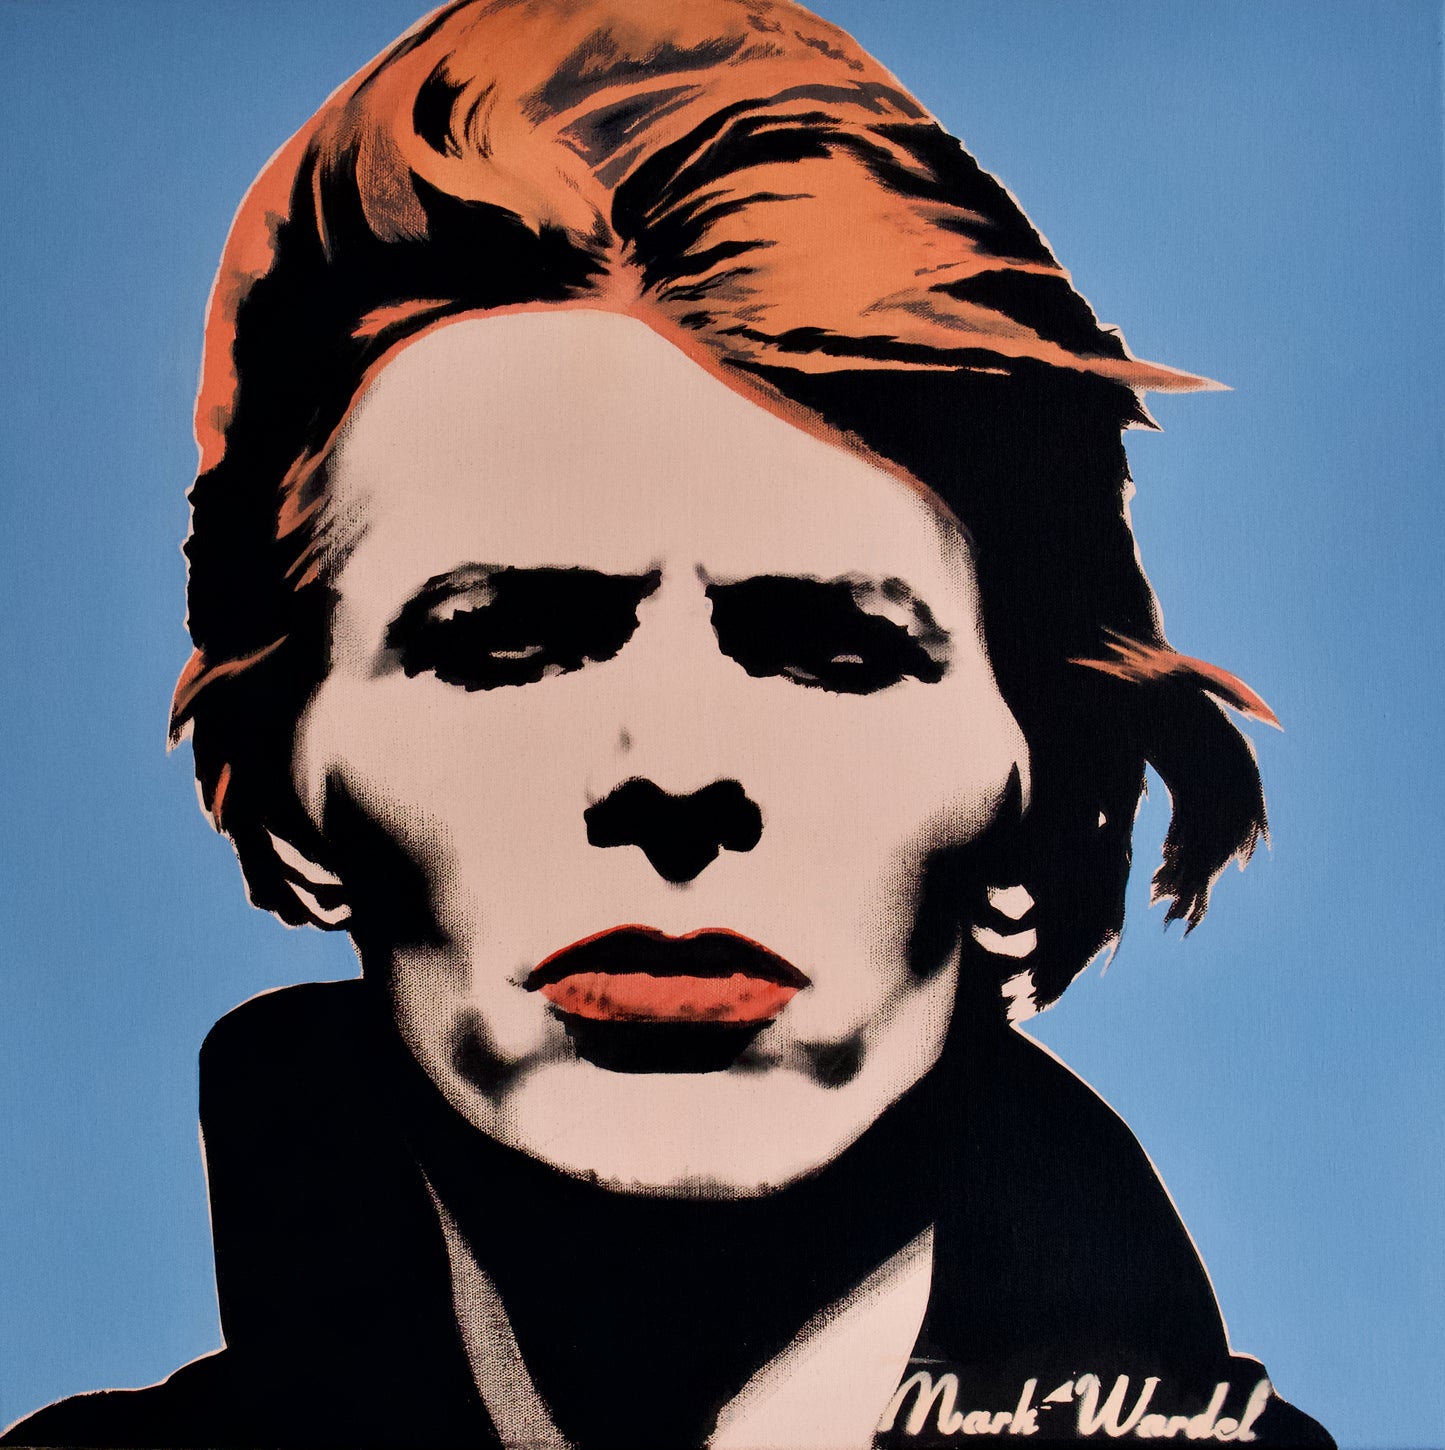 Bowie 'Newton sees the future'
Limited edition fine art print